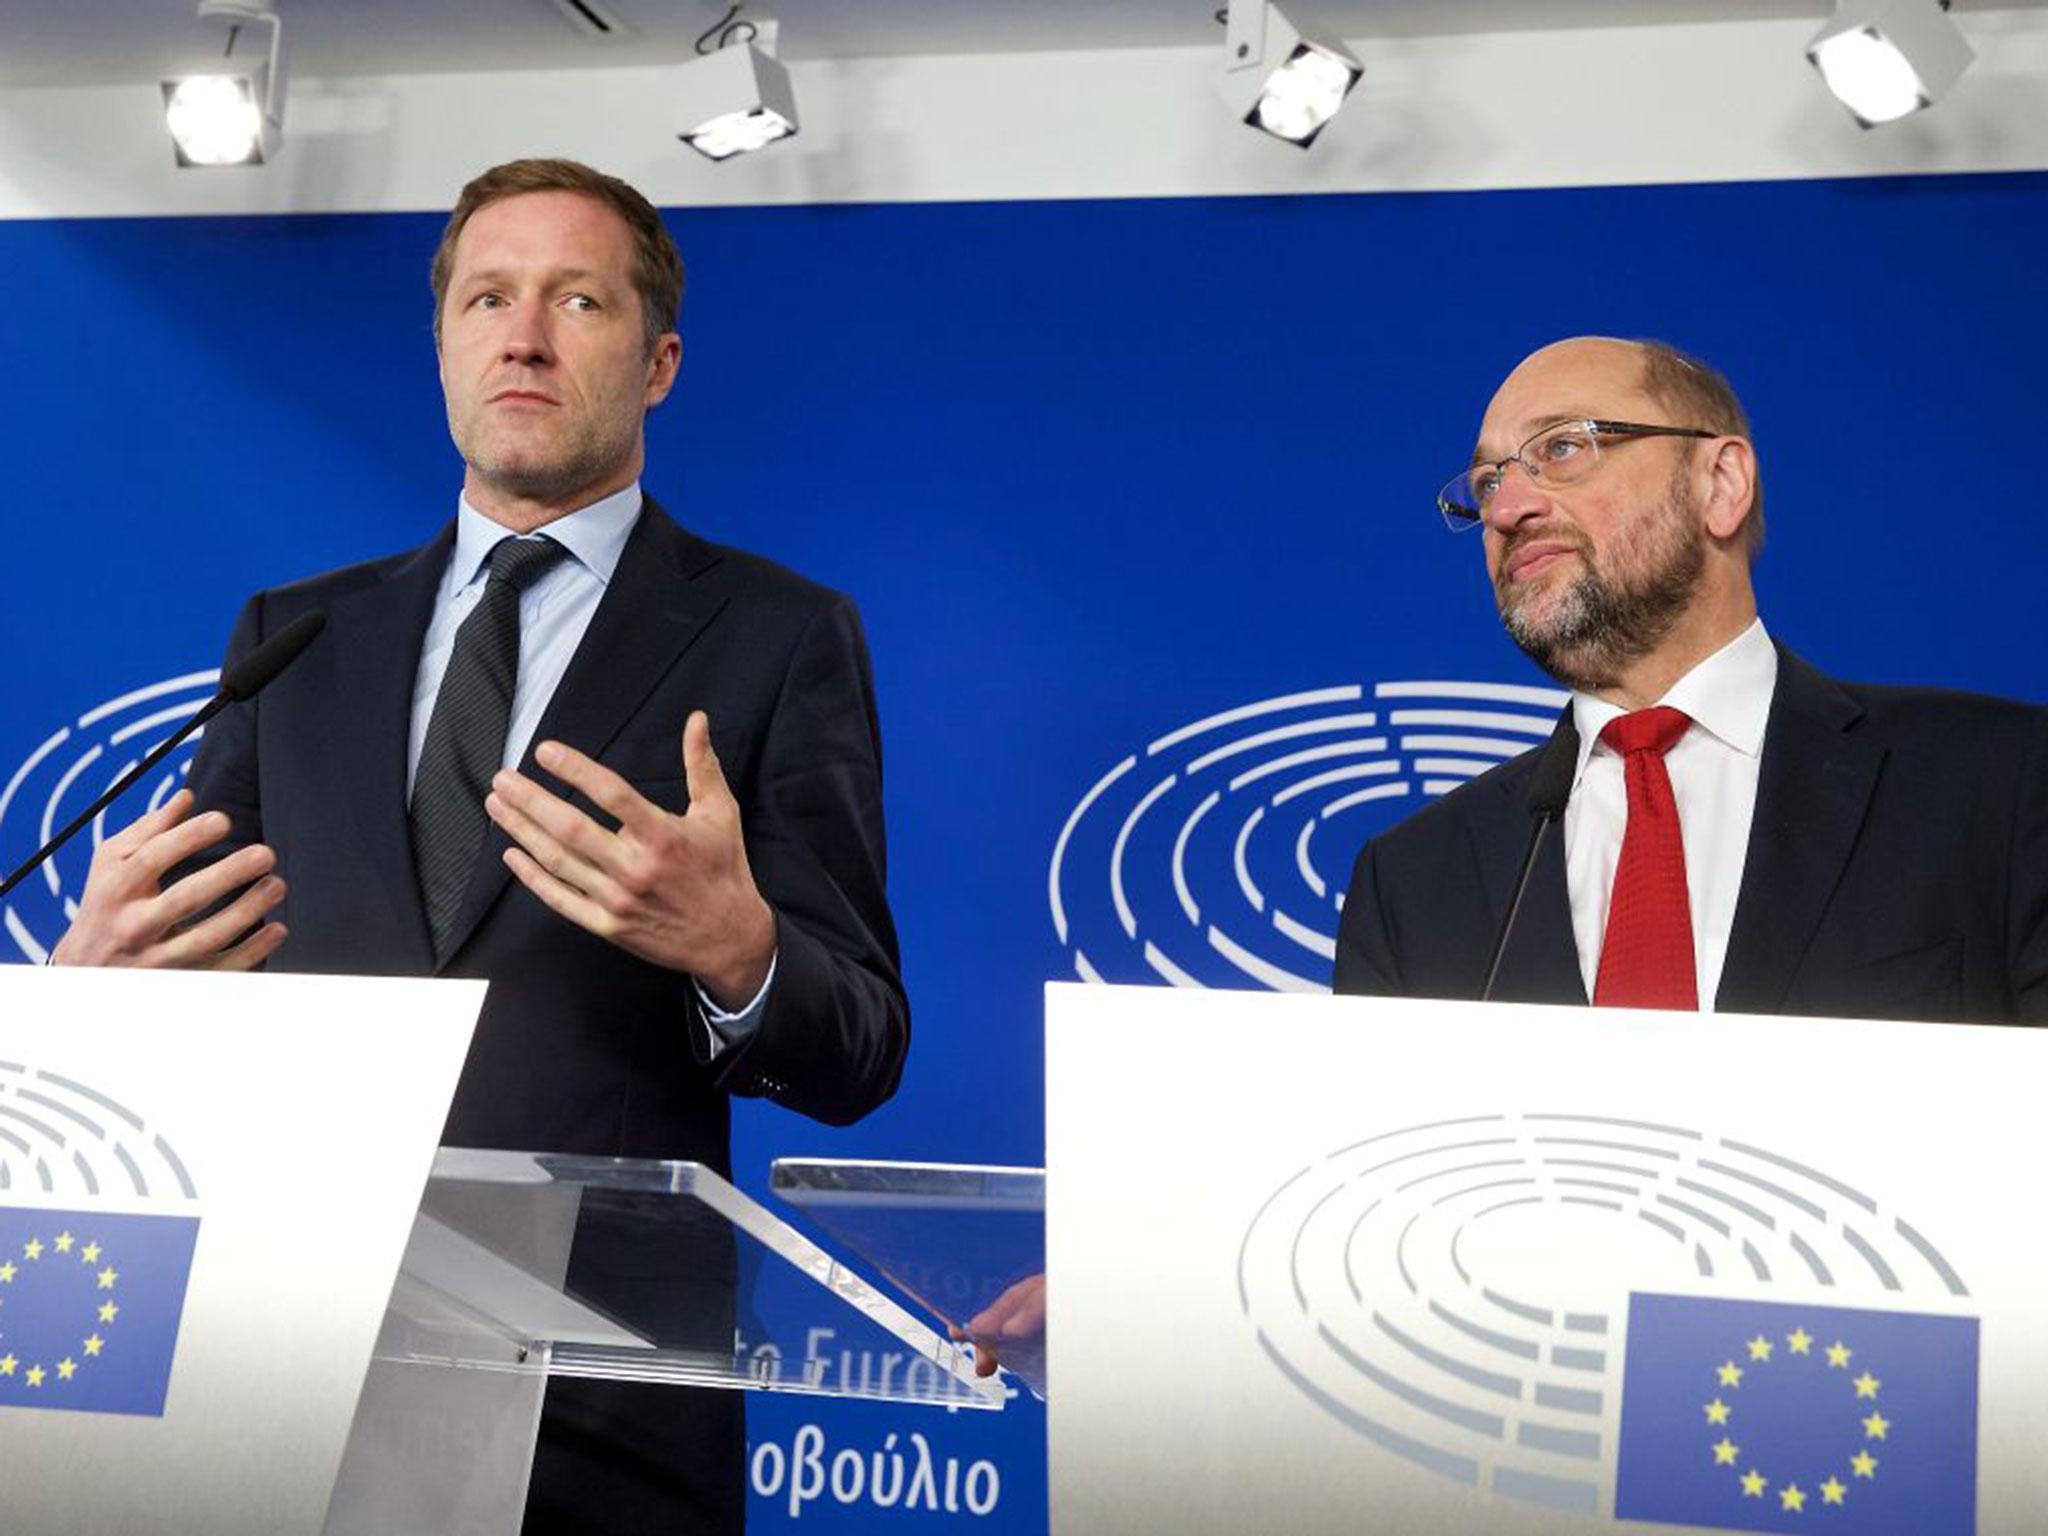 Wallonia’s government head Paul Magnette and European Parliament President Martin Schulz after their meeting regarding Ceta (Getty)